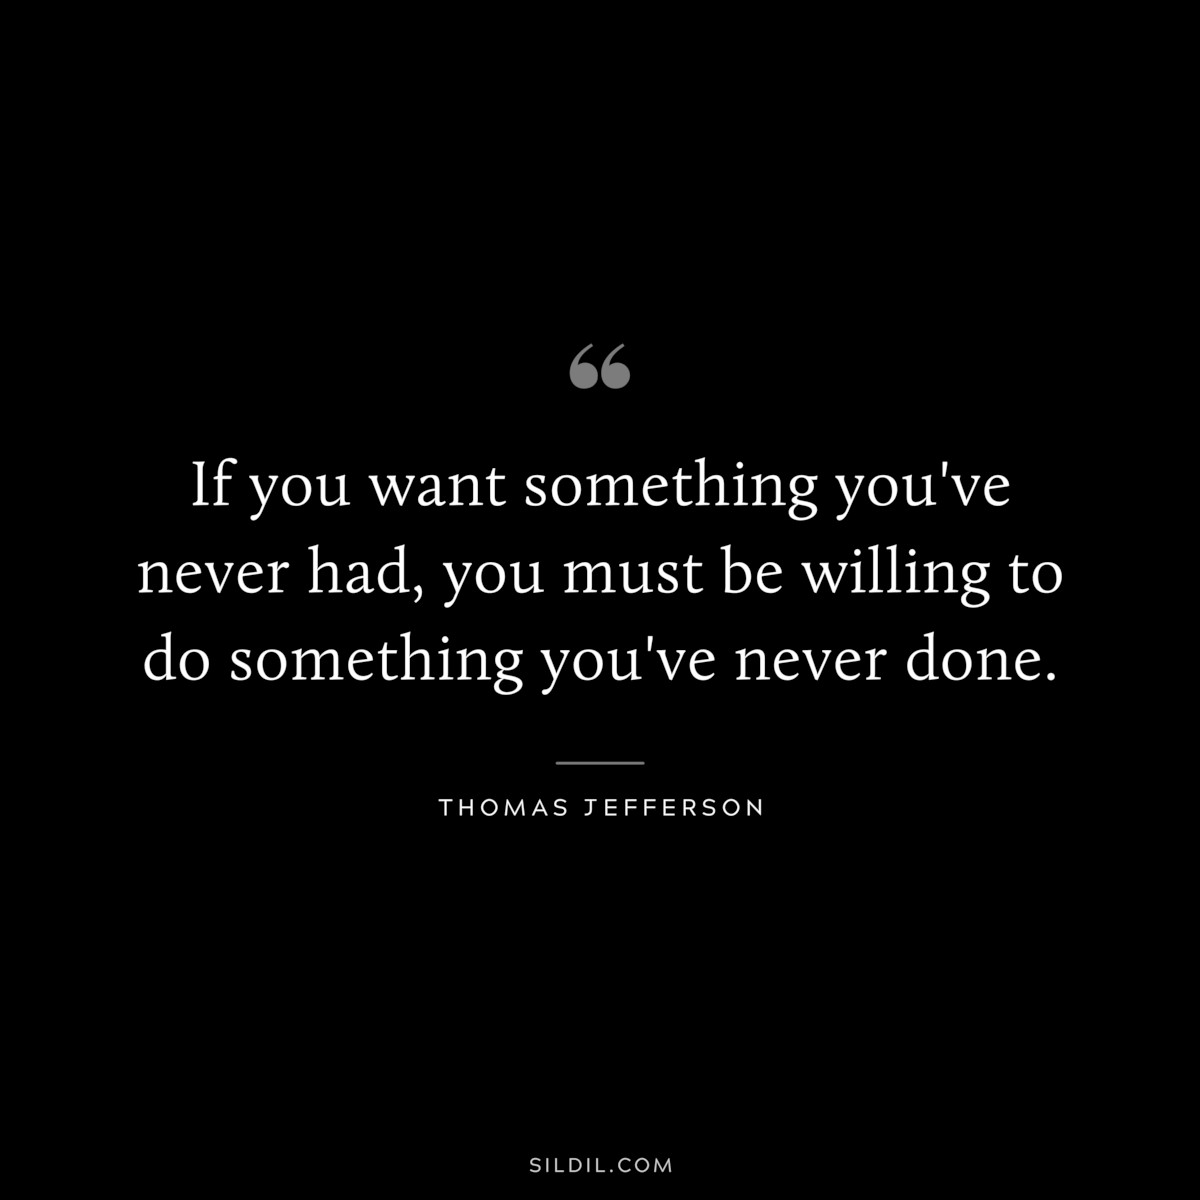 If you want something you've never had, you must be willing to do something you've never done. ― Thomas Jefferson